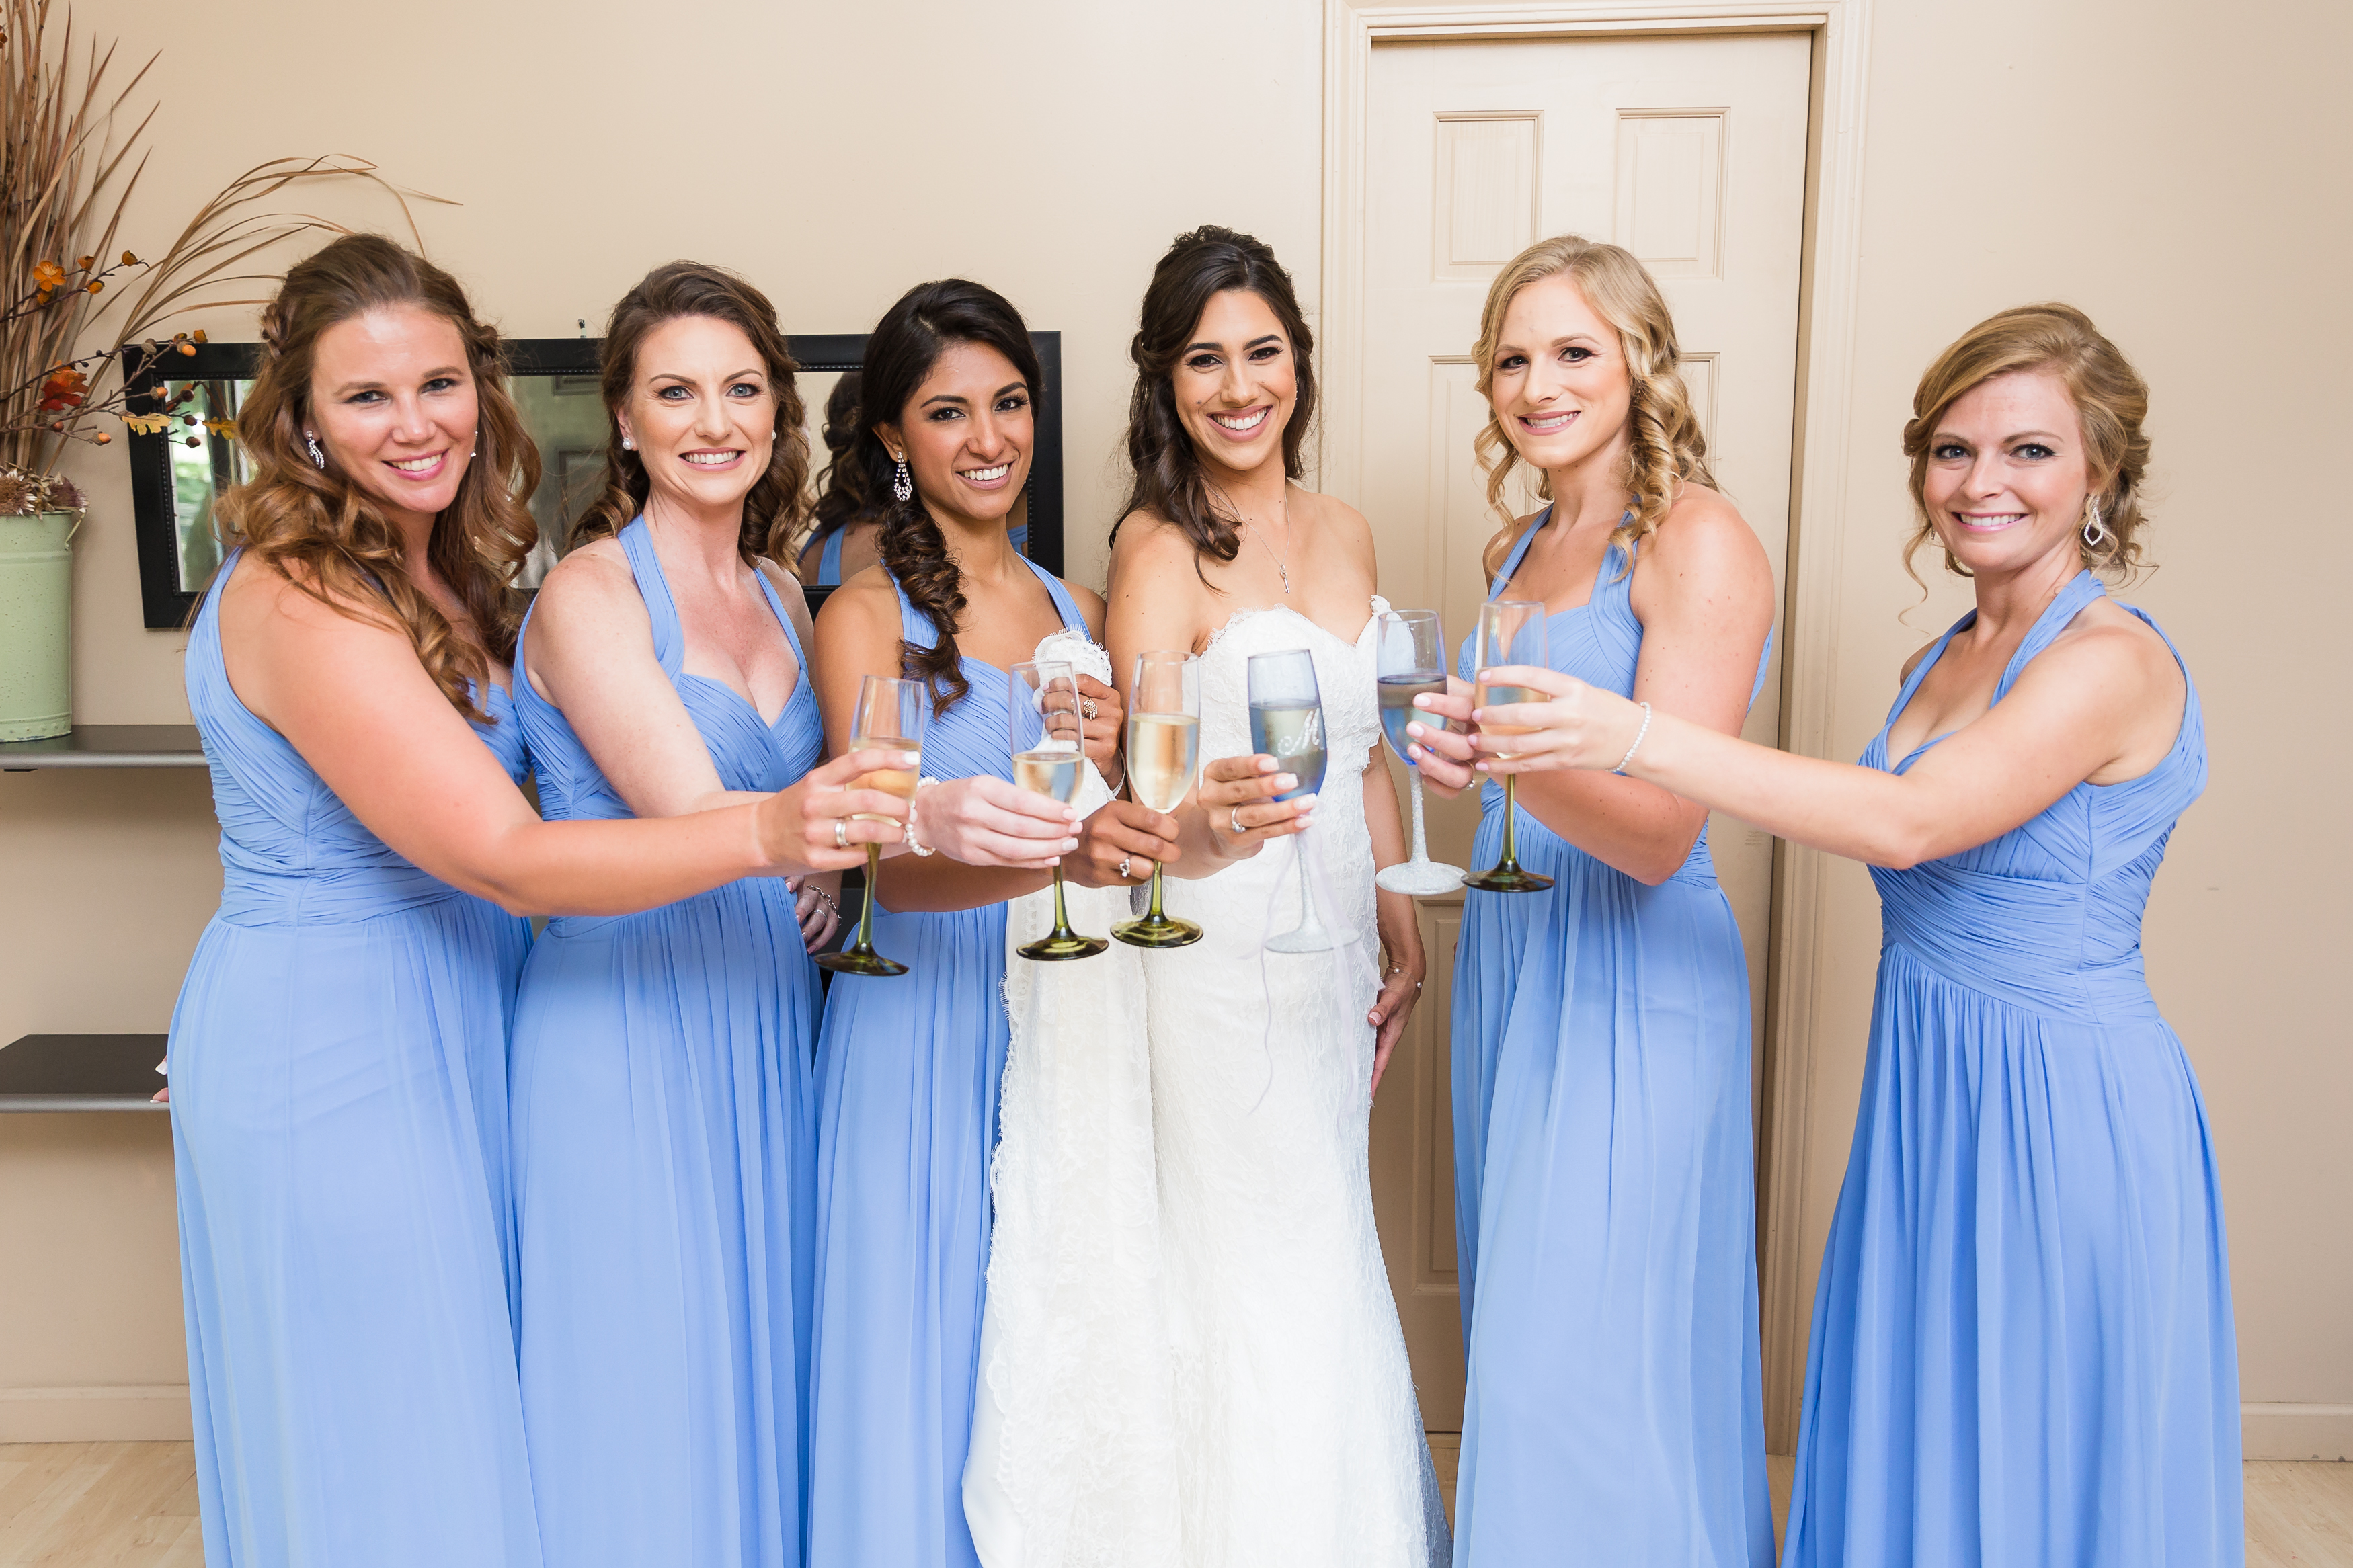 Gift ideas for bridesmaids